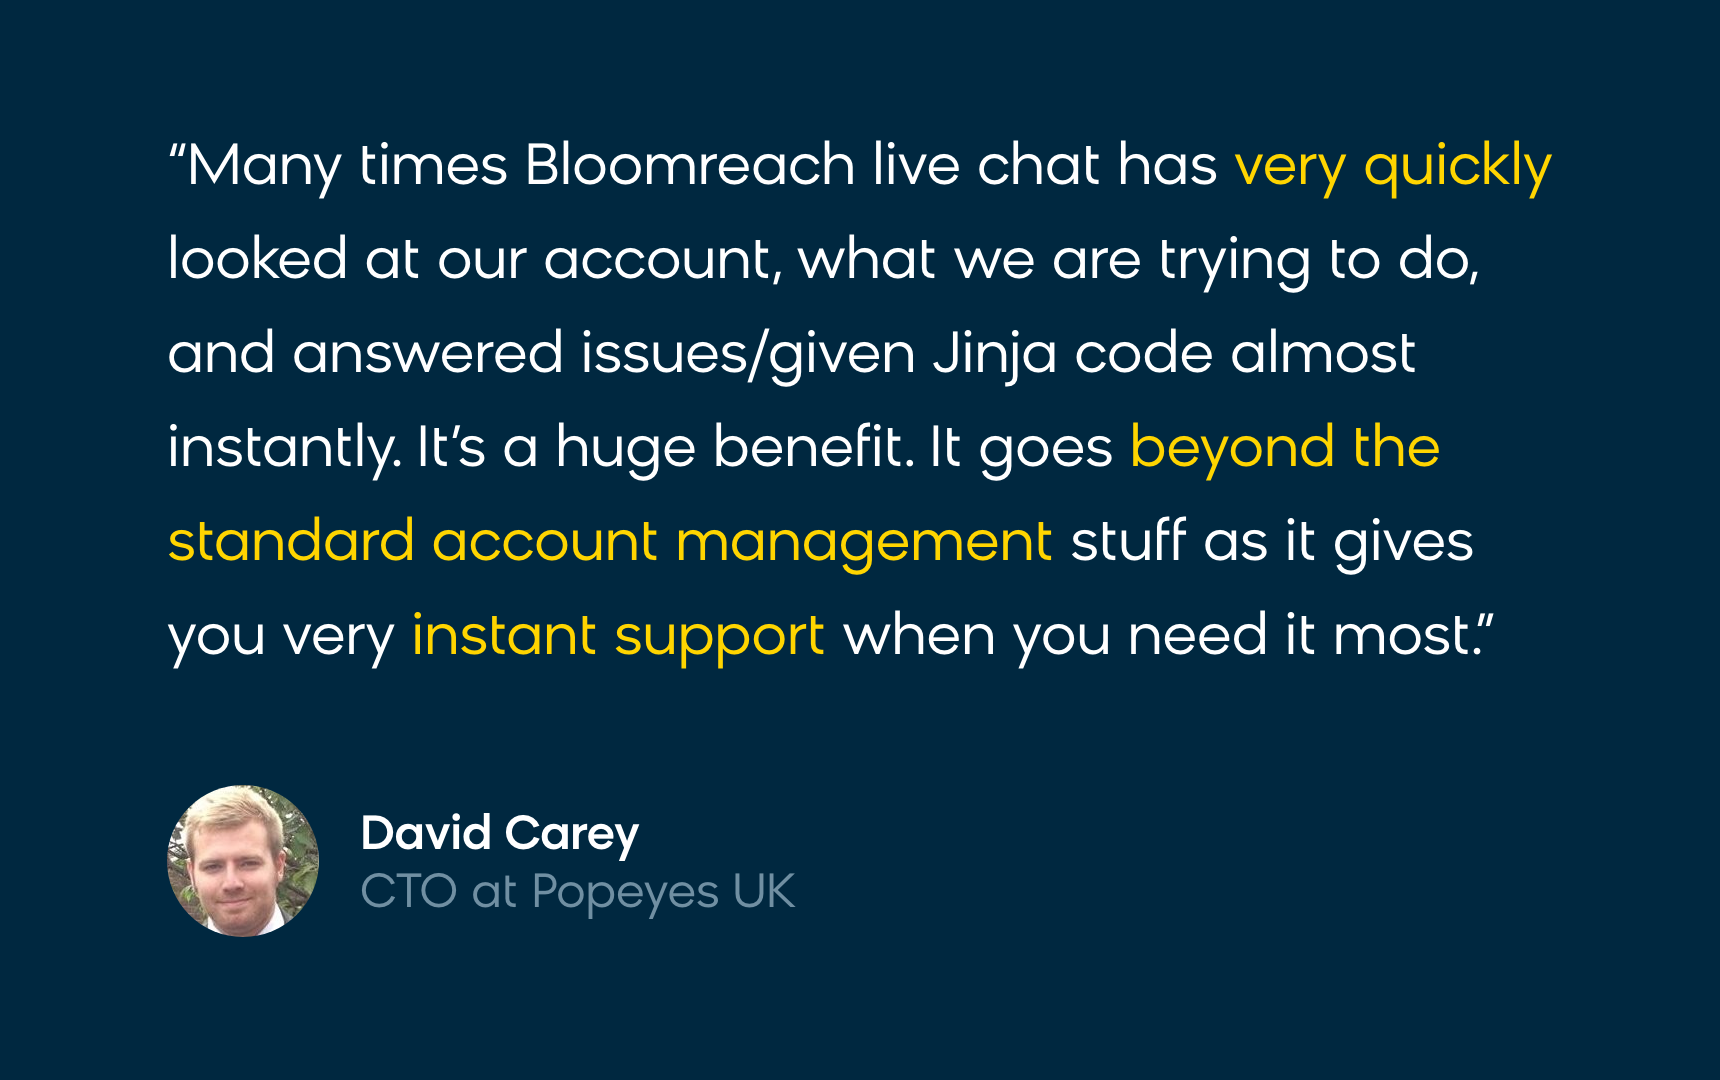 A review showing gratitude for Bloomreach’s live chat customer support that provides instant service.